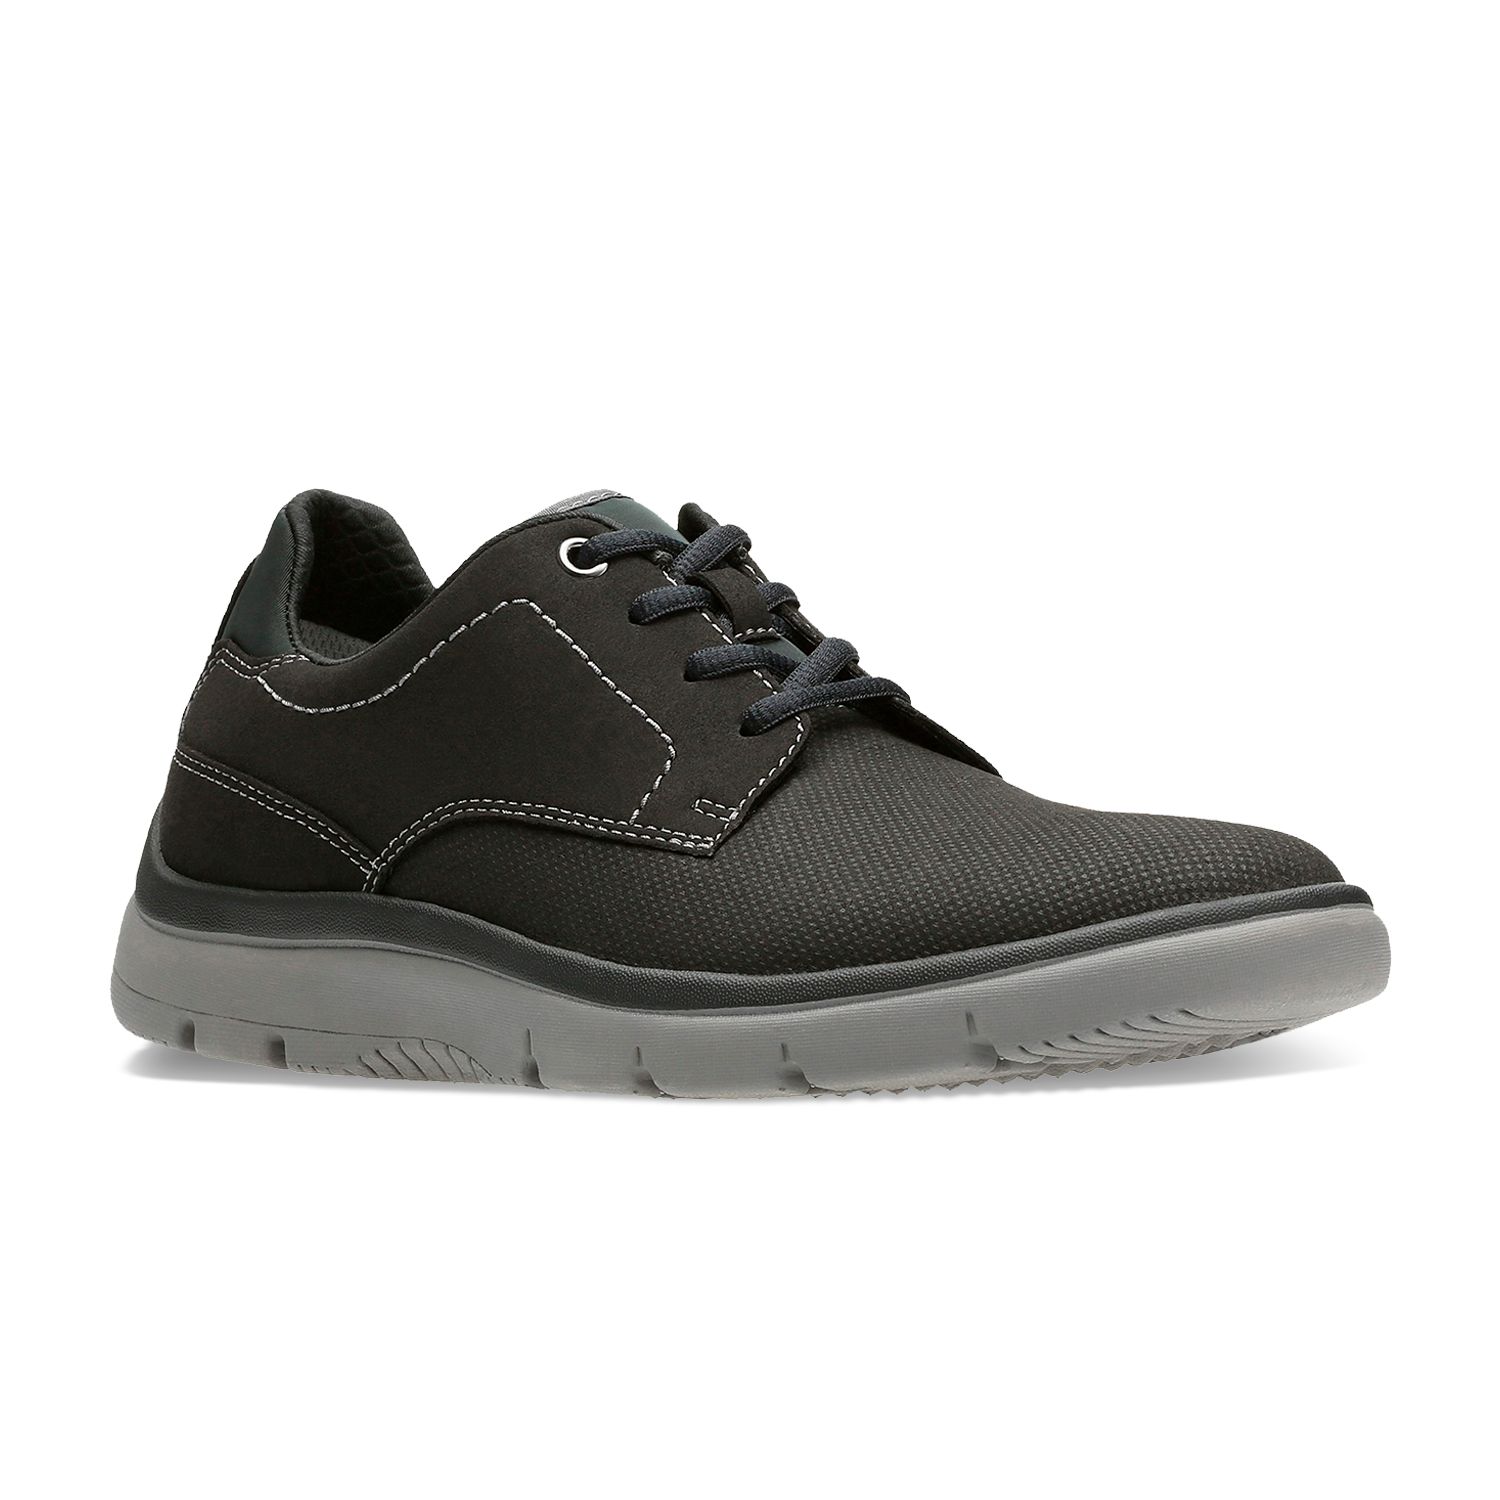 clarks cloudsteppers mens shoes